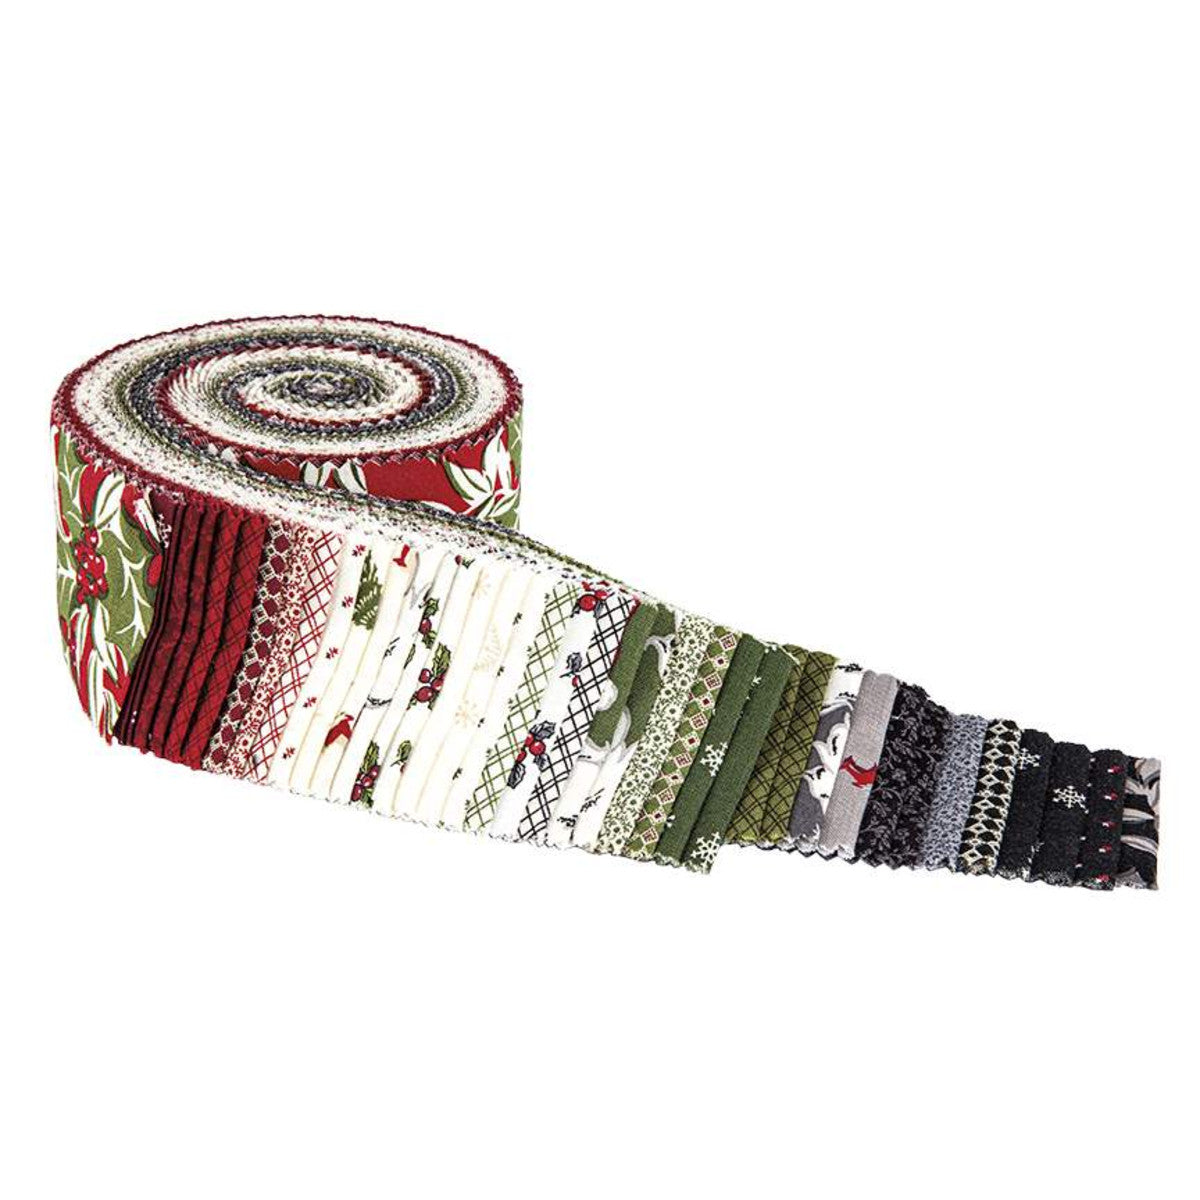 This 2 1/2" Rolie Polie precut bundle includes 40 pieces from the Christmas at Buttermilk Acres collection by Stacy West of Buttermilk Basin Design Co. for Riley Blake Designs. Each print will be included 1-2 times in the bundle.  100% cotton  Width: 2 1/2" Strips